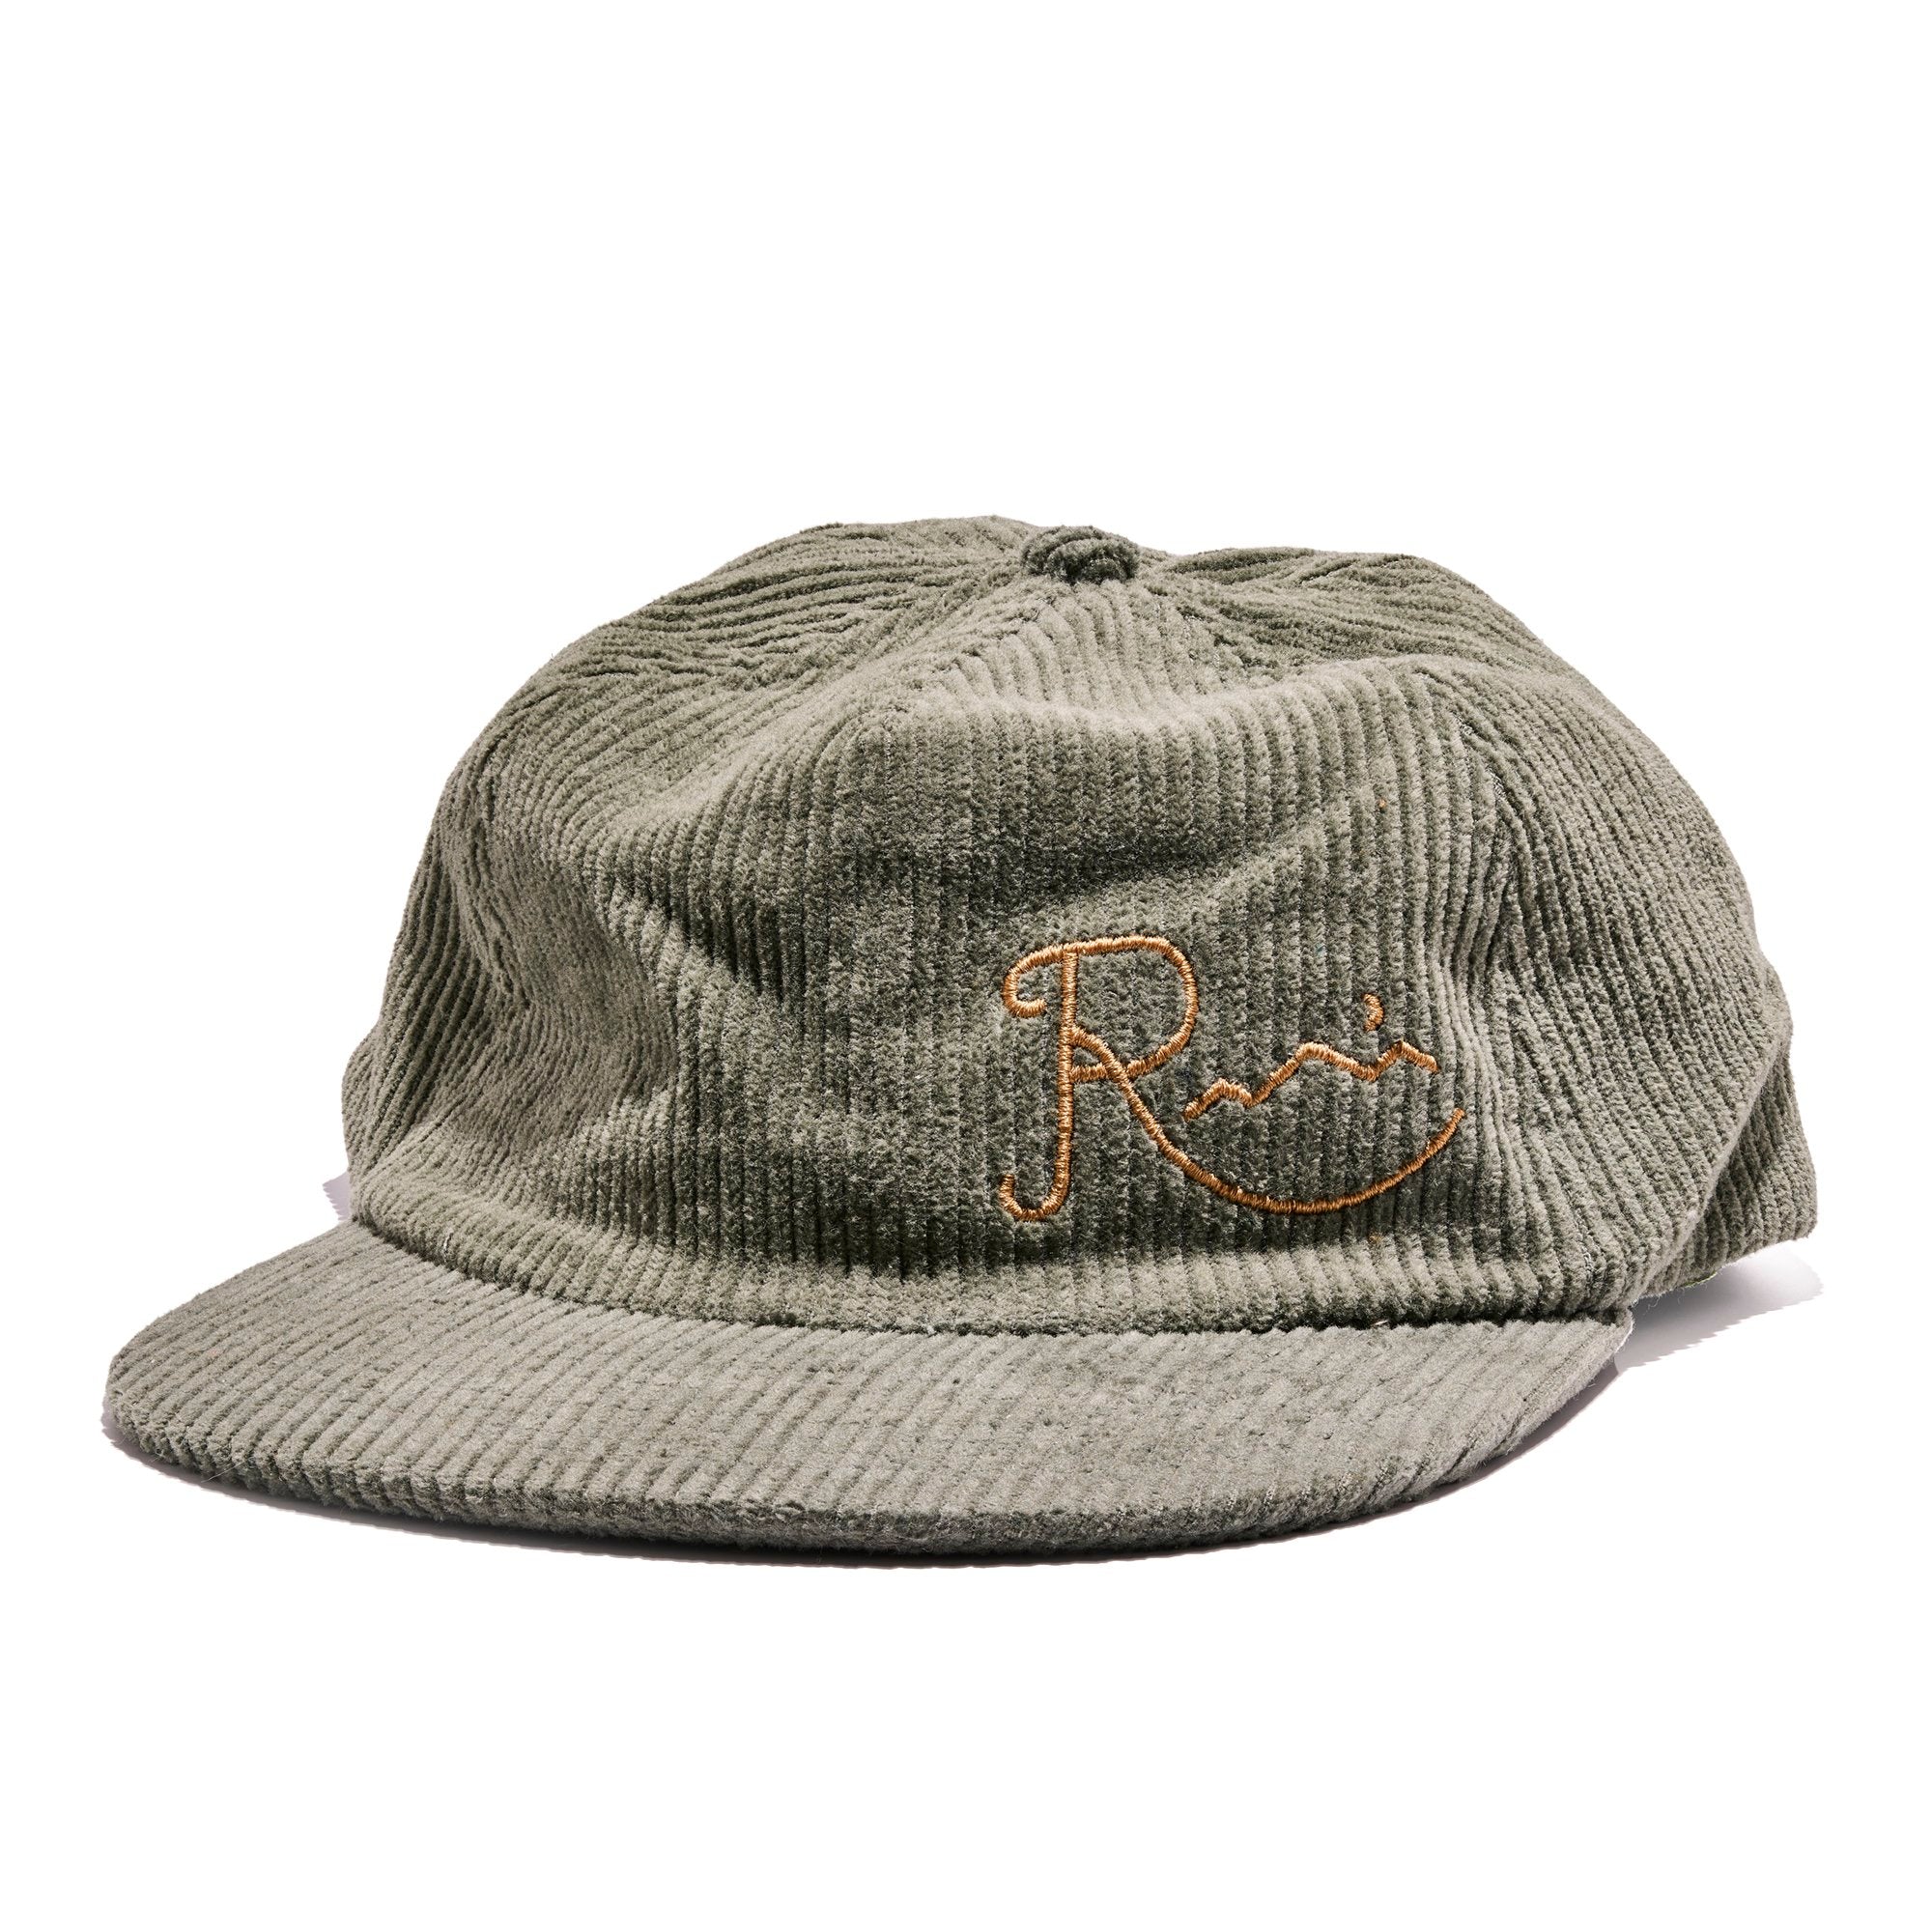 Idaho Angler Leather Patch Troutdale Corduroy Hat - Idaho Angler